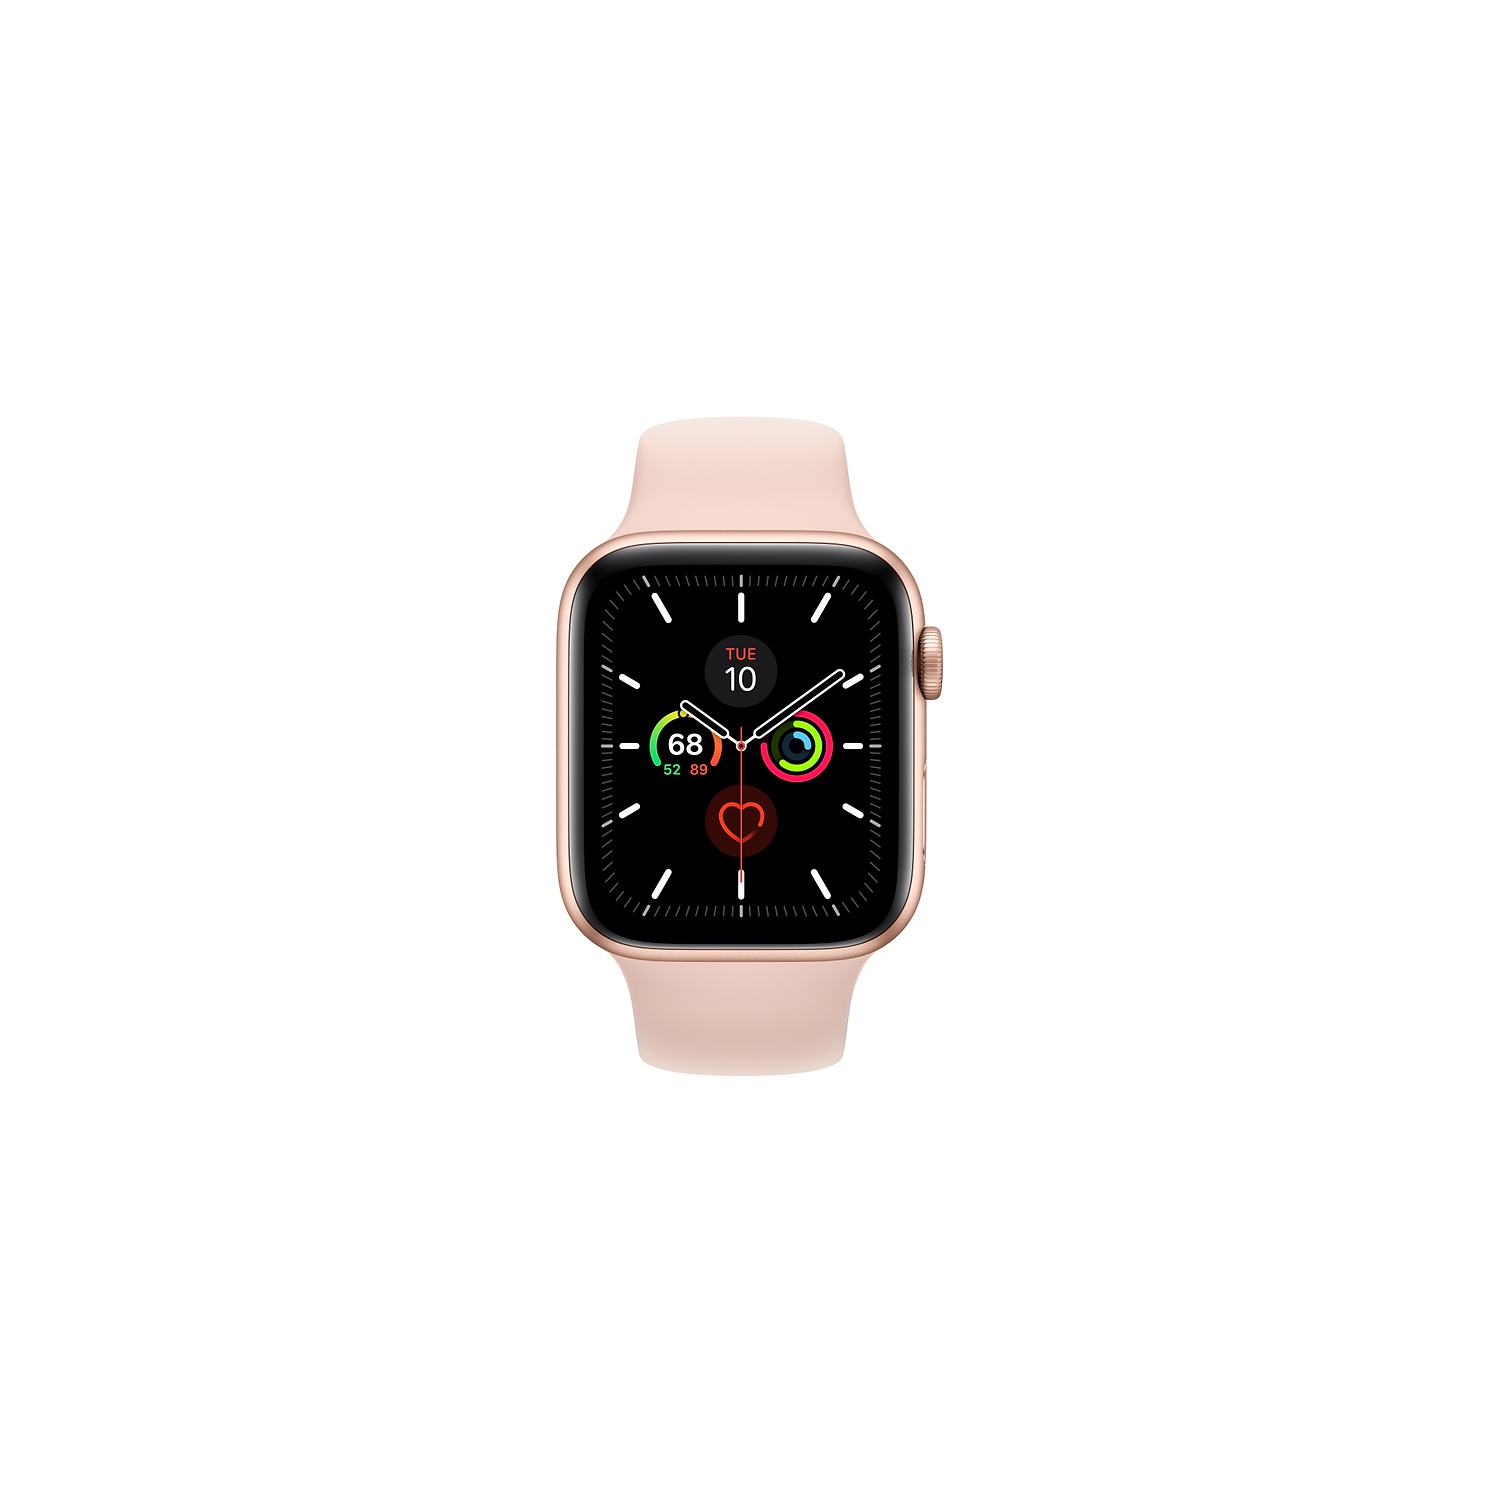 Refurbished (Good) - Apple Watch Series 5 (GPS + Cellular) 44mm Gold Aluminum with Pink Sand Sport Band